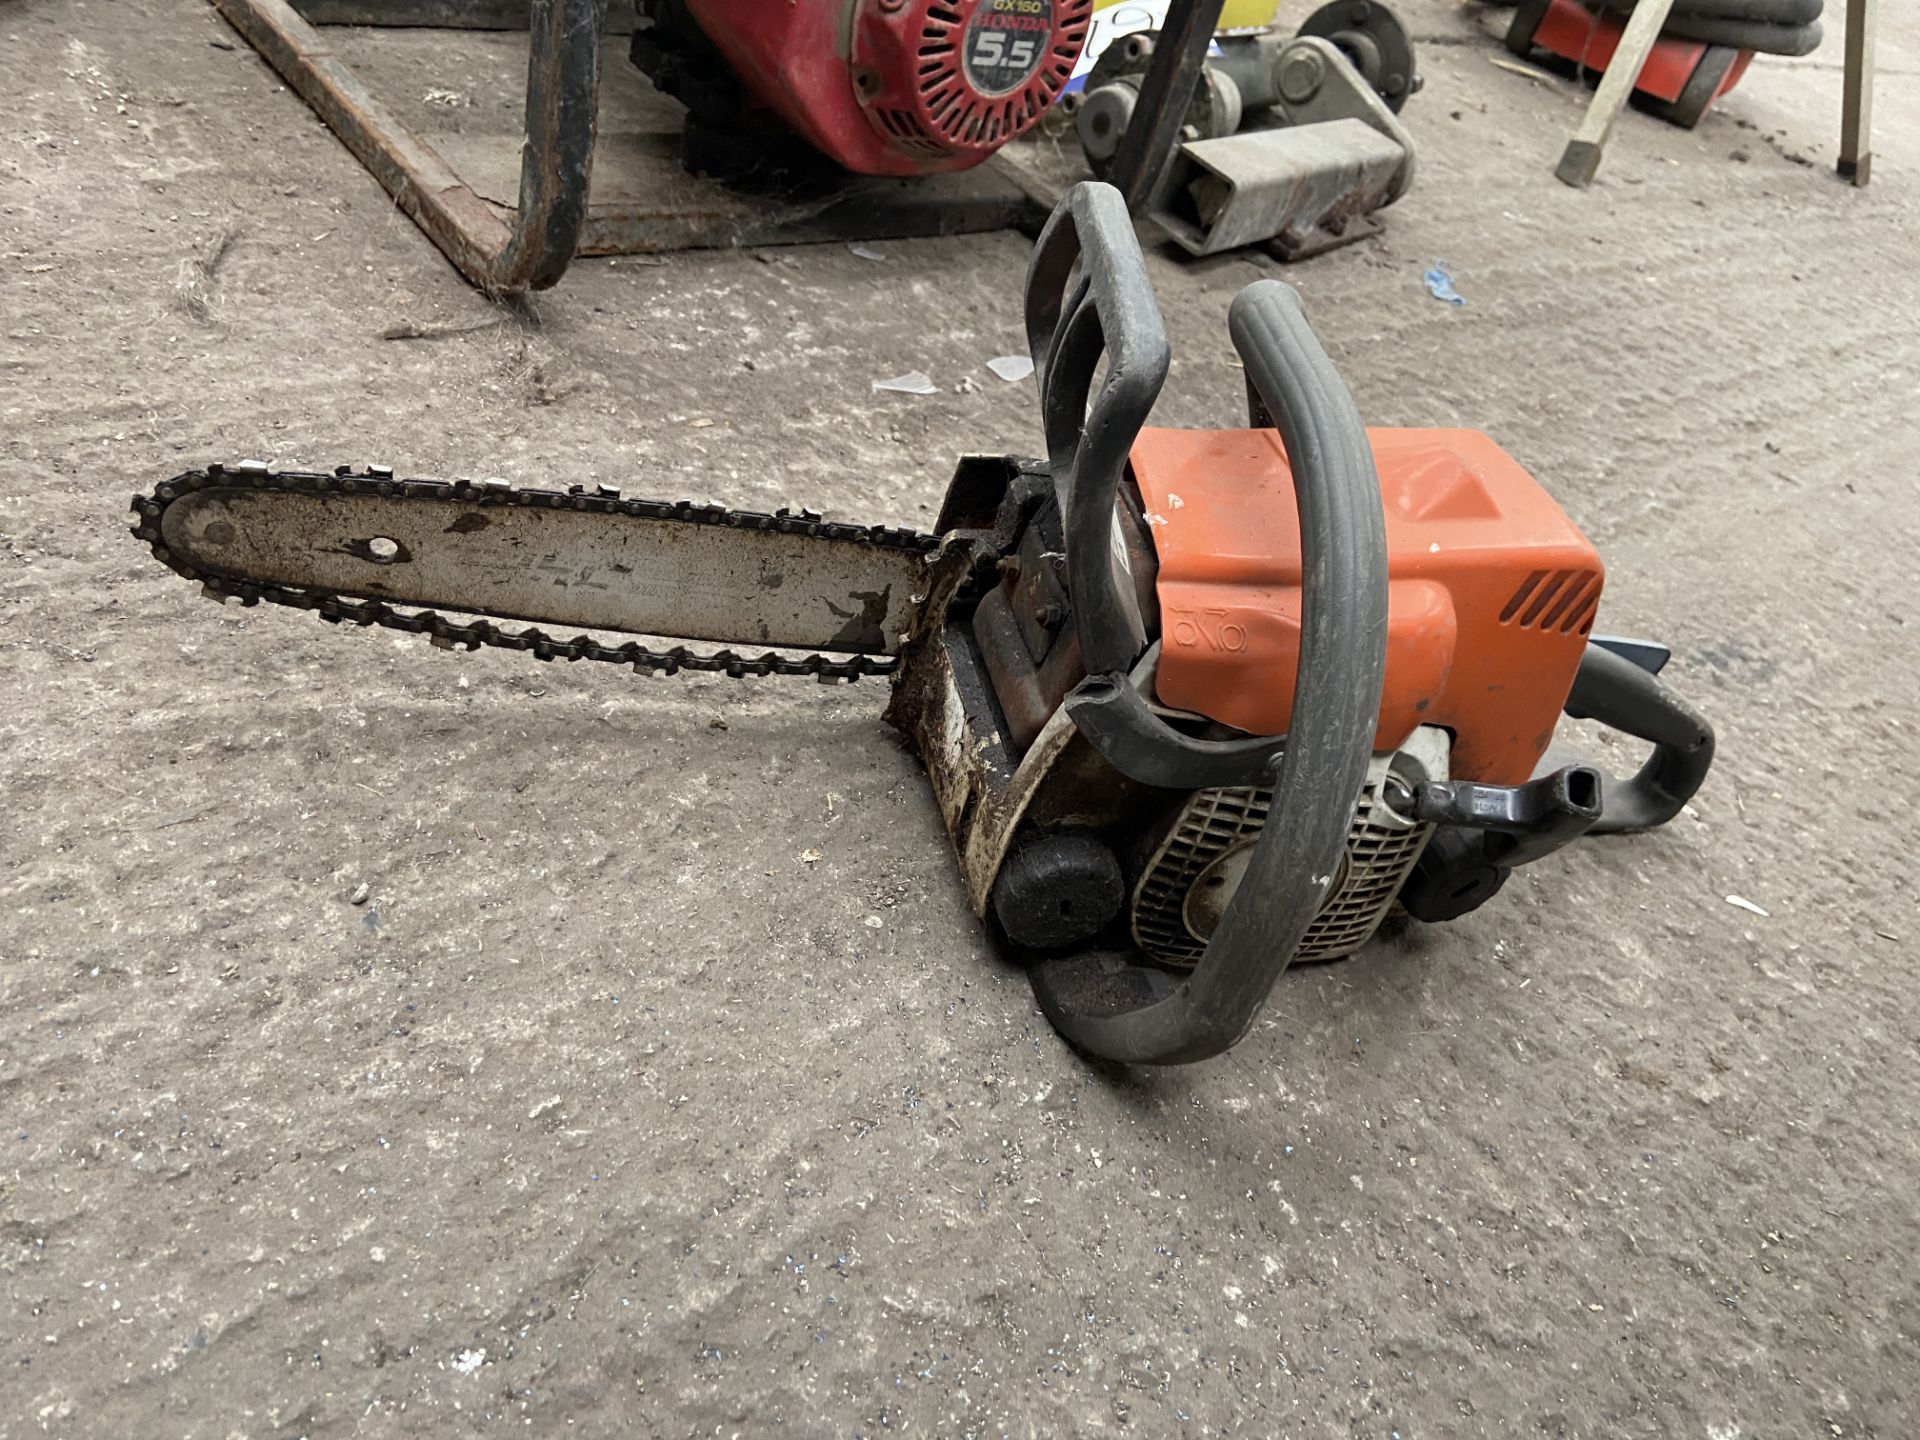 Stihl MS 170 Chainsaw Note:- VAT will not be charged on hammer price for this lot, however VAT